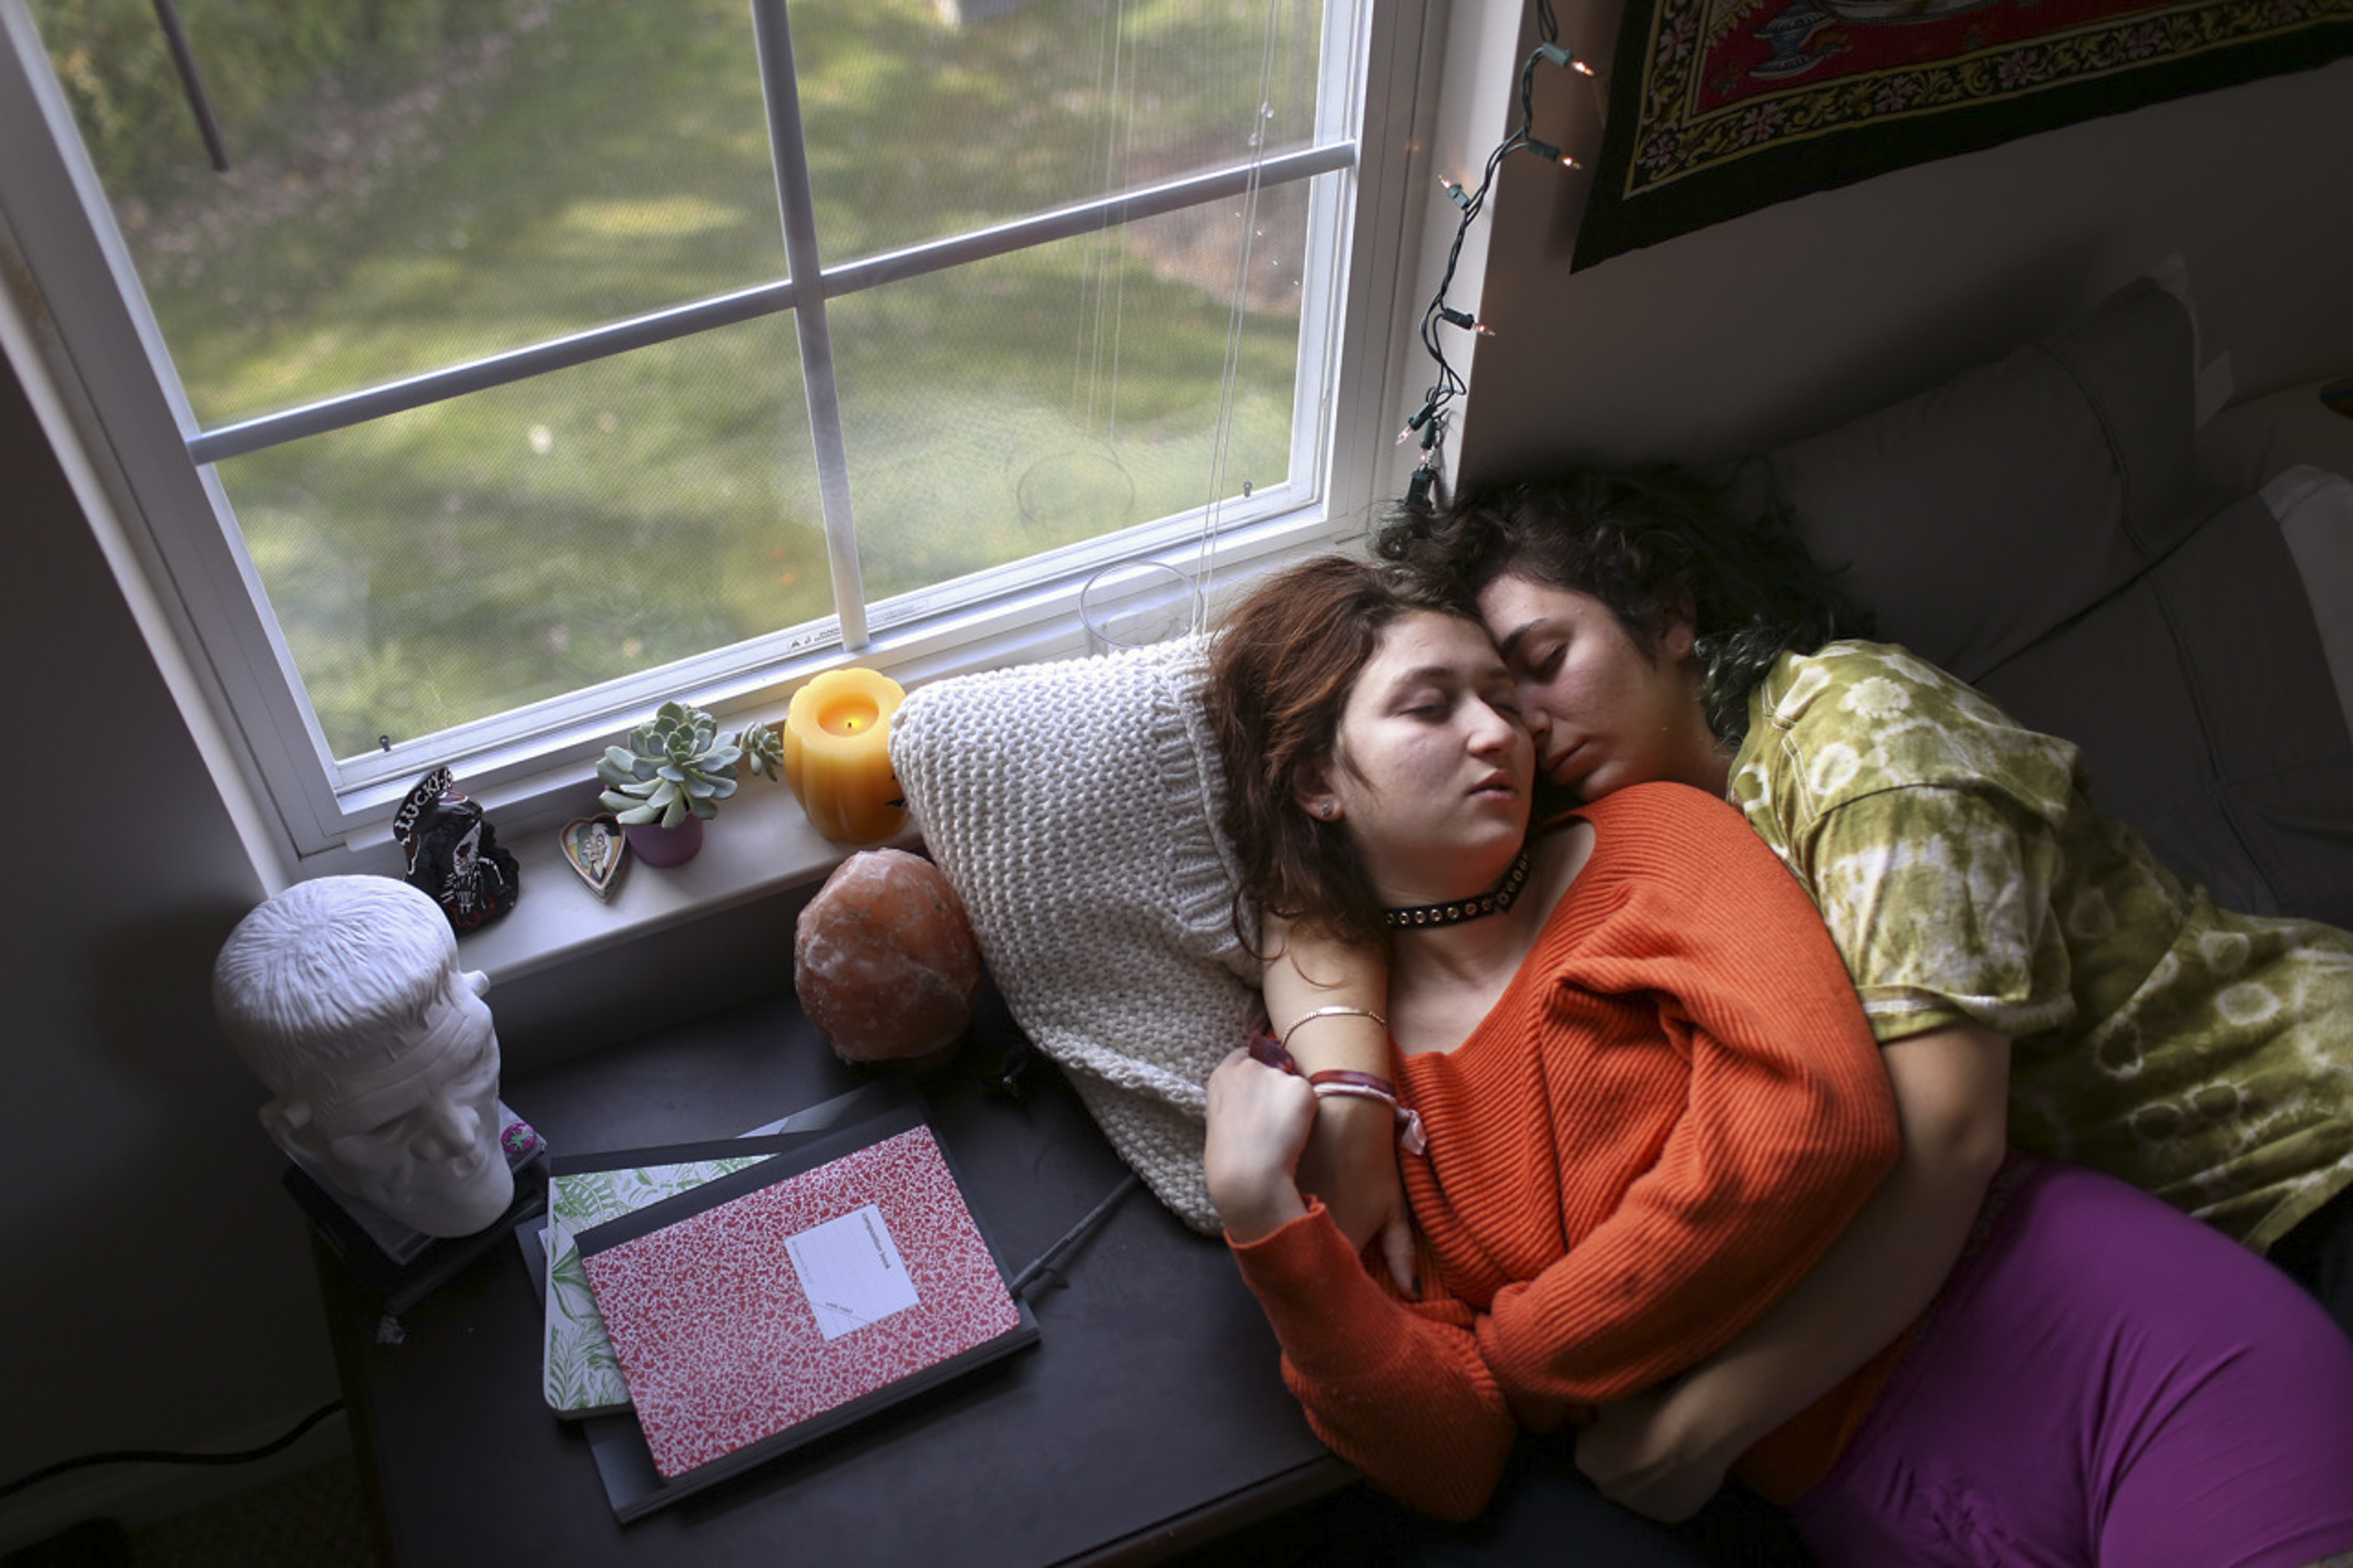 This is a portrait showing Rochester Institute of Technology students Jackie Spaventa and Sarah Zuckerman with the intimacy they share for one another. The two students have been in a relationship about one year, and have found comfort in each other.